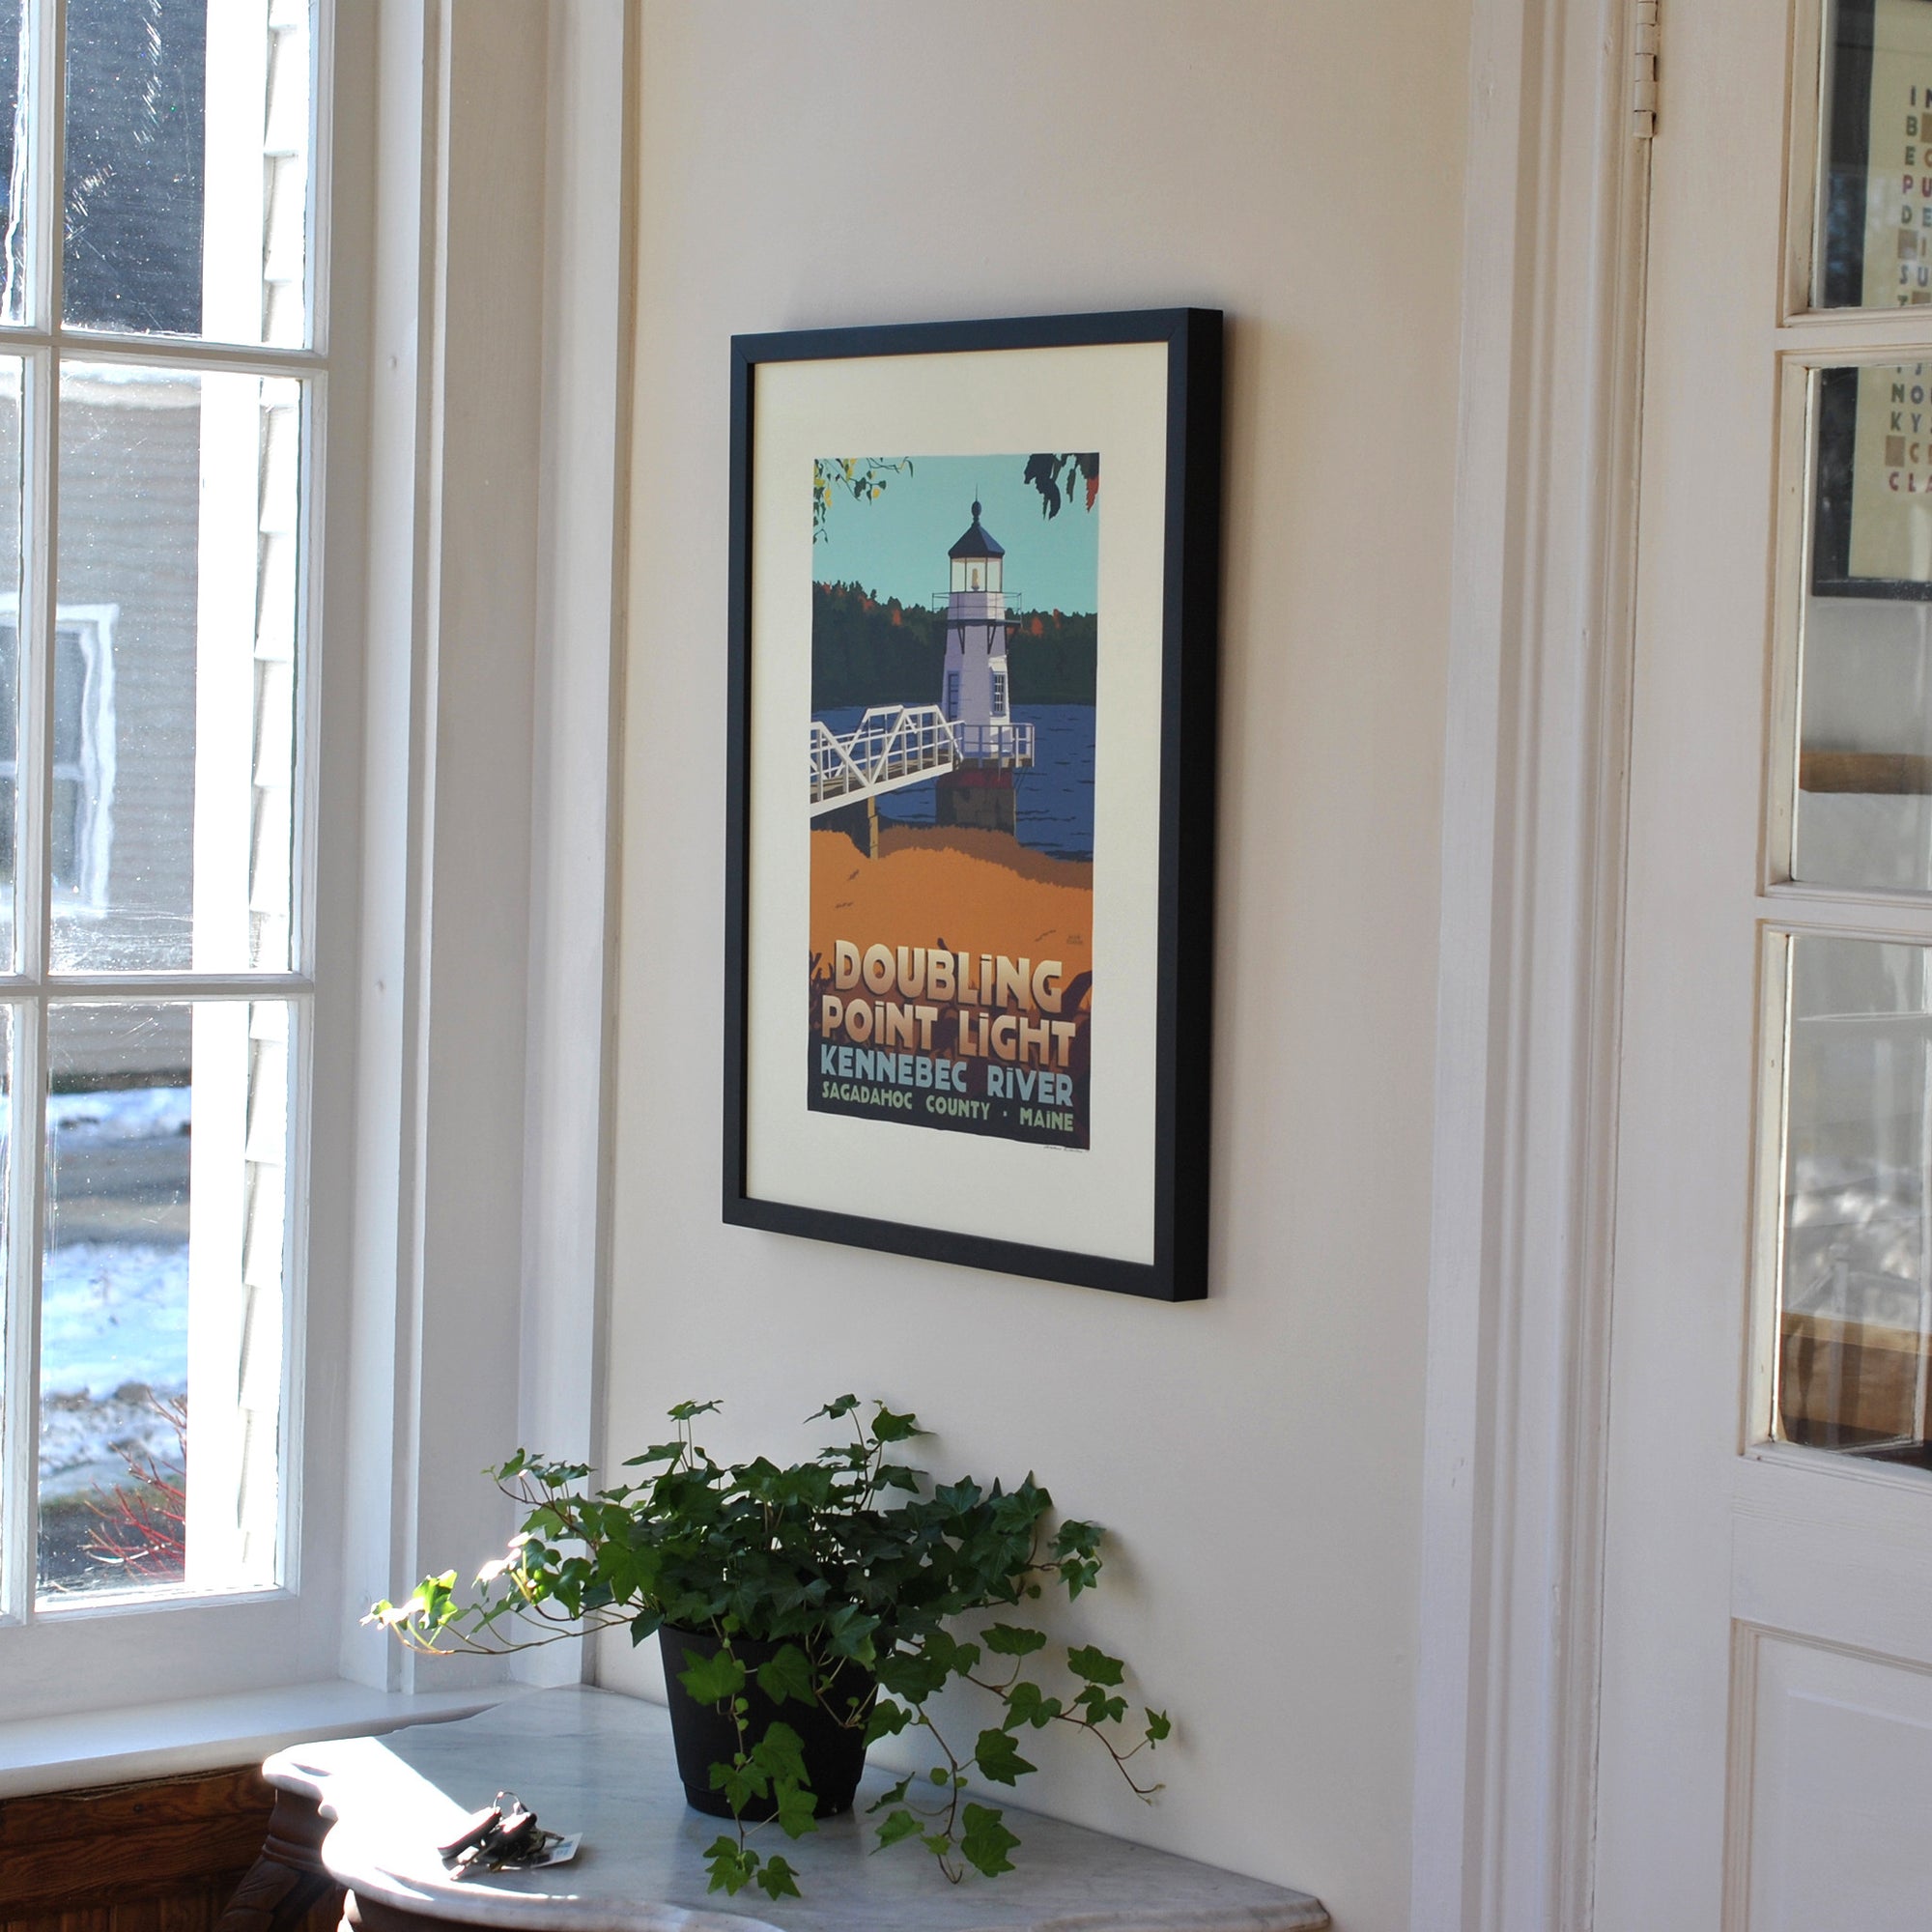 Doubling Point Light Art Print 18" x 24" Framed Travel Poster By Alan Claude - Maine